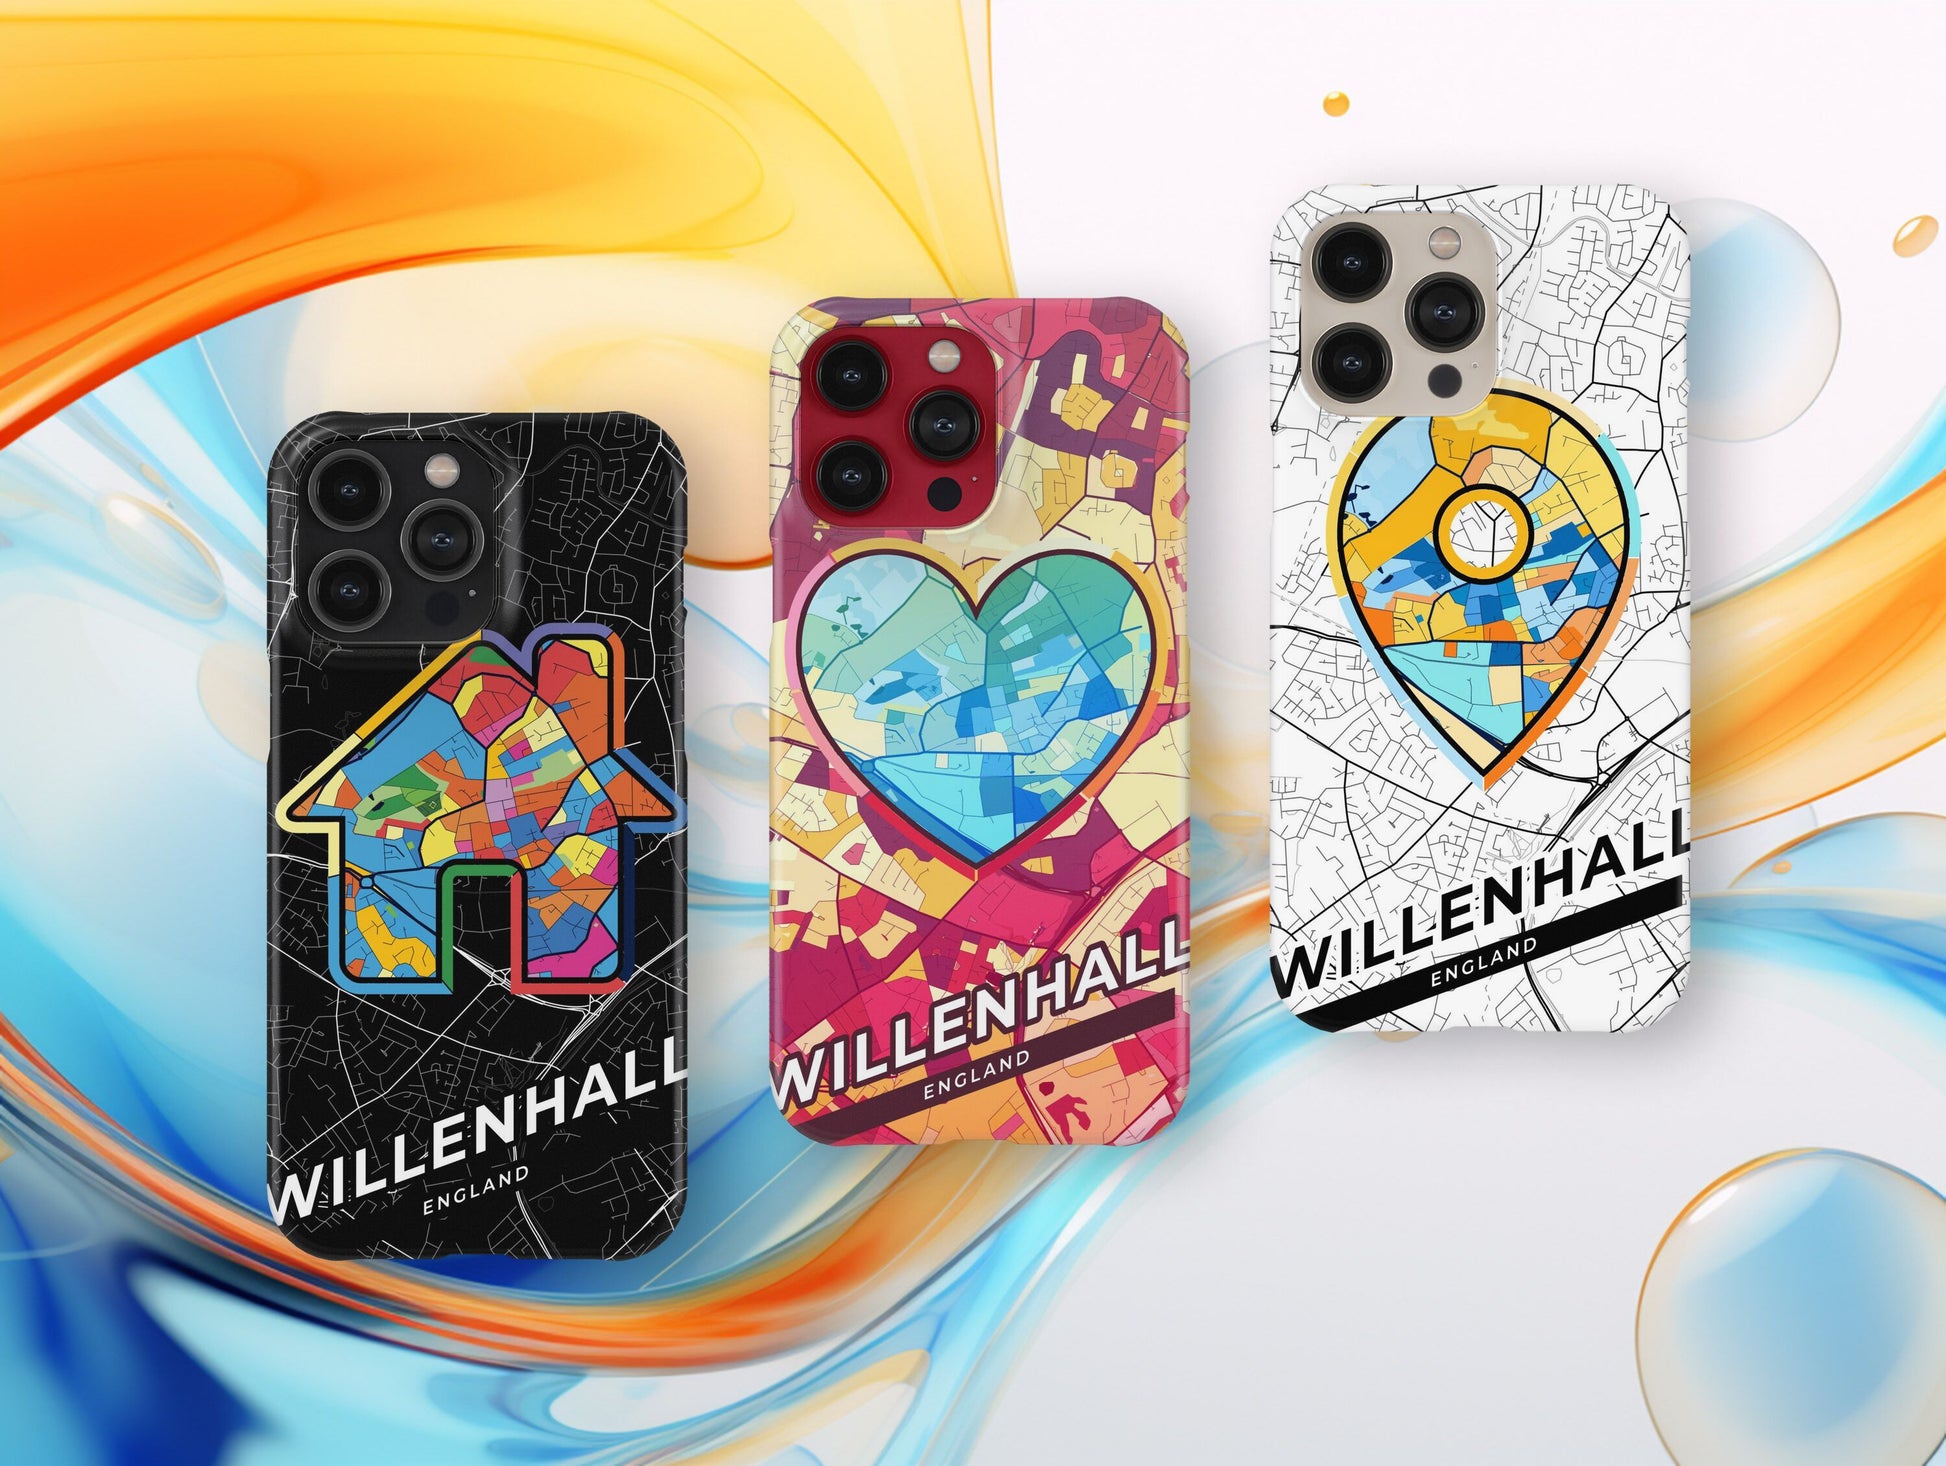 Willenhall England slim phone case with colorful icon